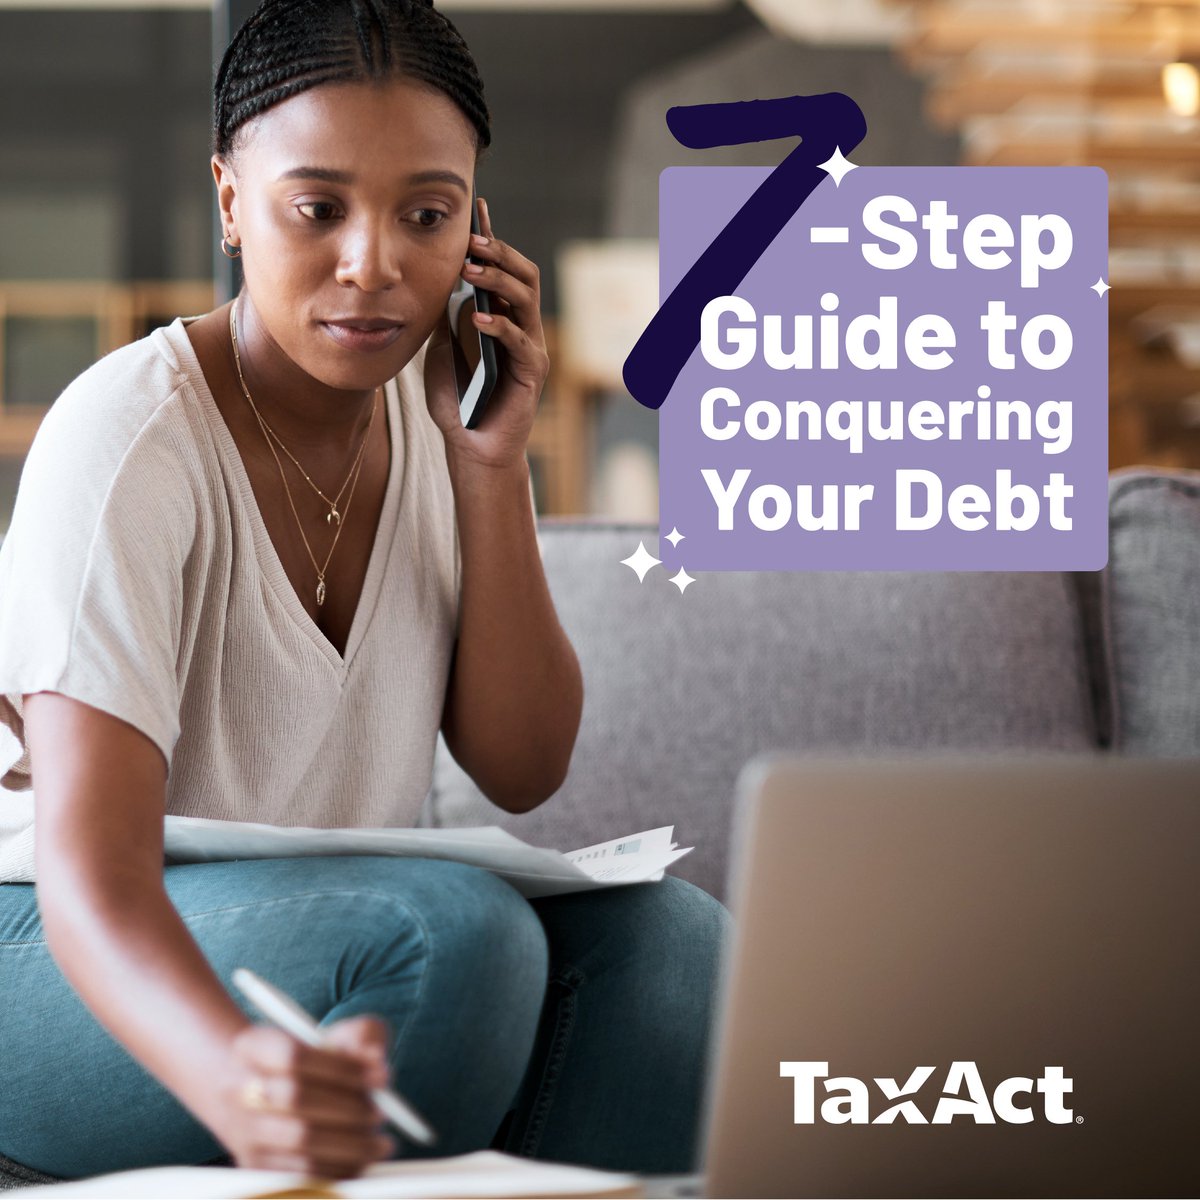 Overwhelmed by debt? We've got your ultimate 7-step guide to conquer it! Our latest blog reveals proven strategies and actionable steps to break free from the burden of debt and reclaim financial freedom. Don't let debt hold you back any longer! bit.ly/3pLPylw